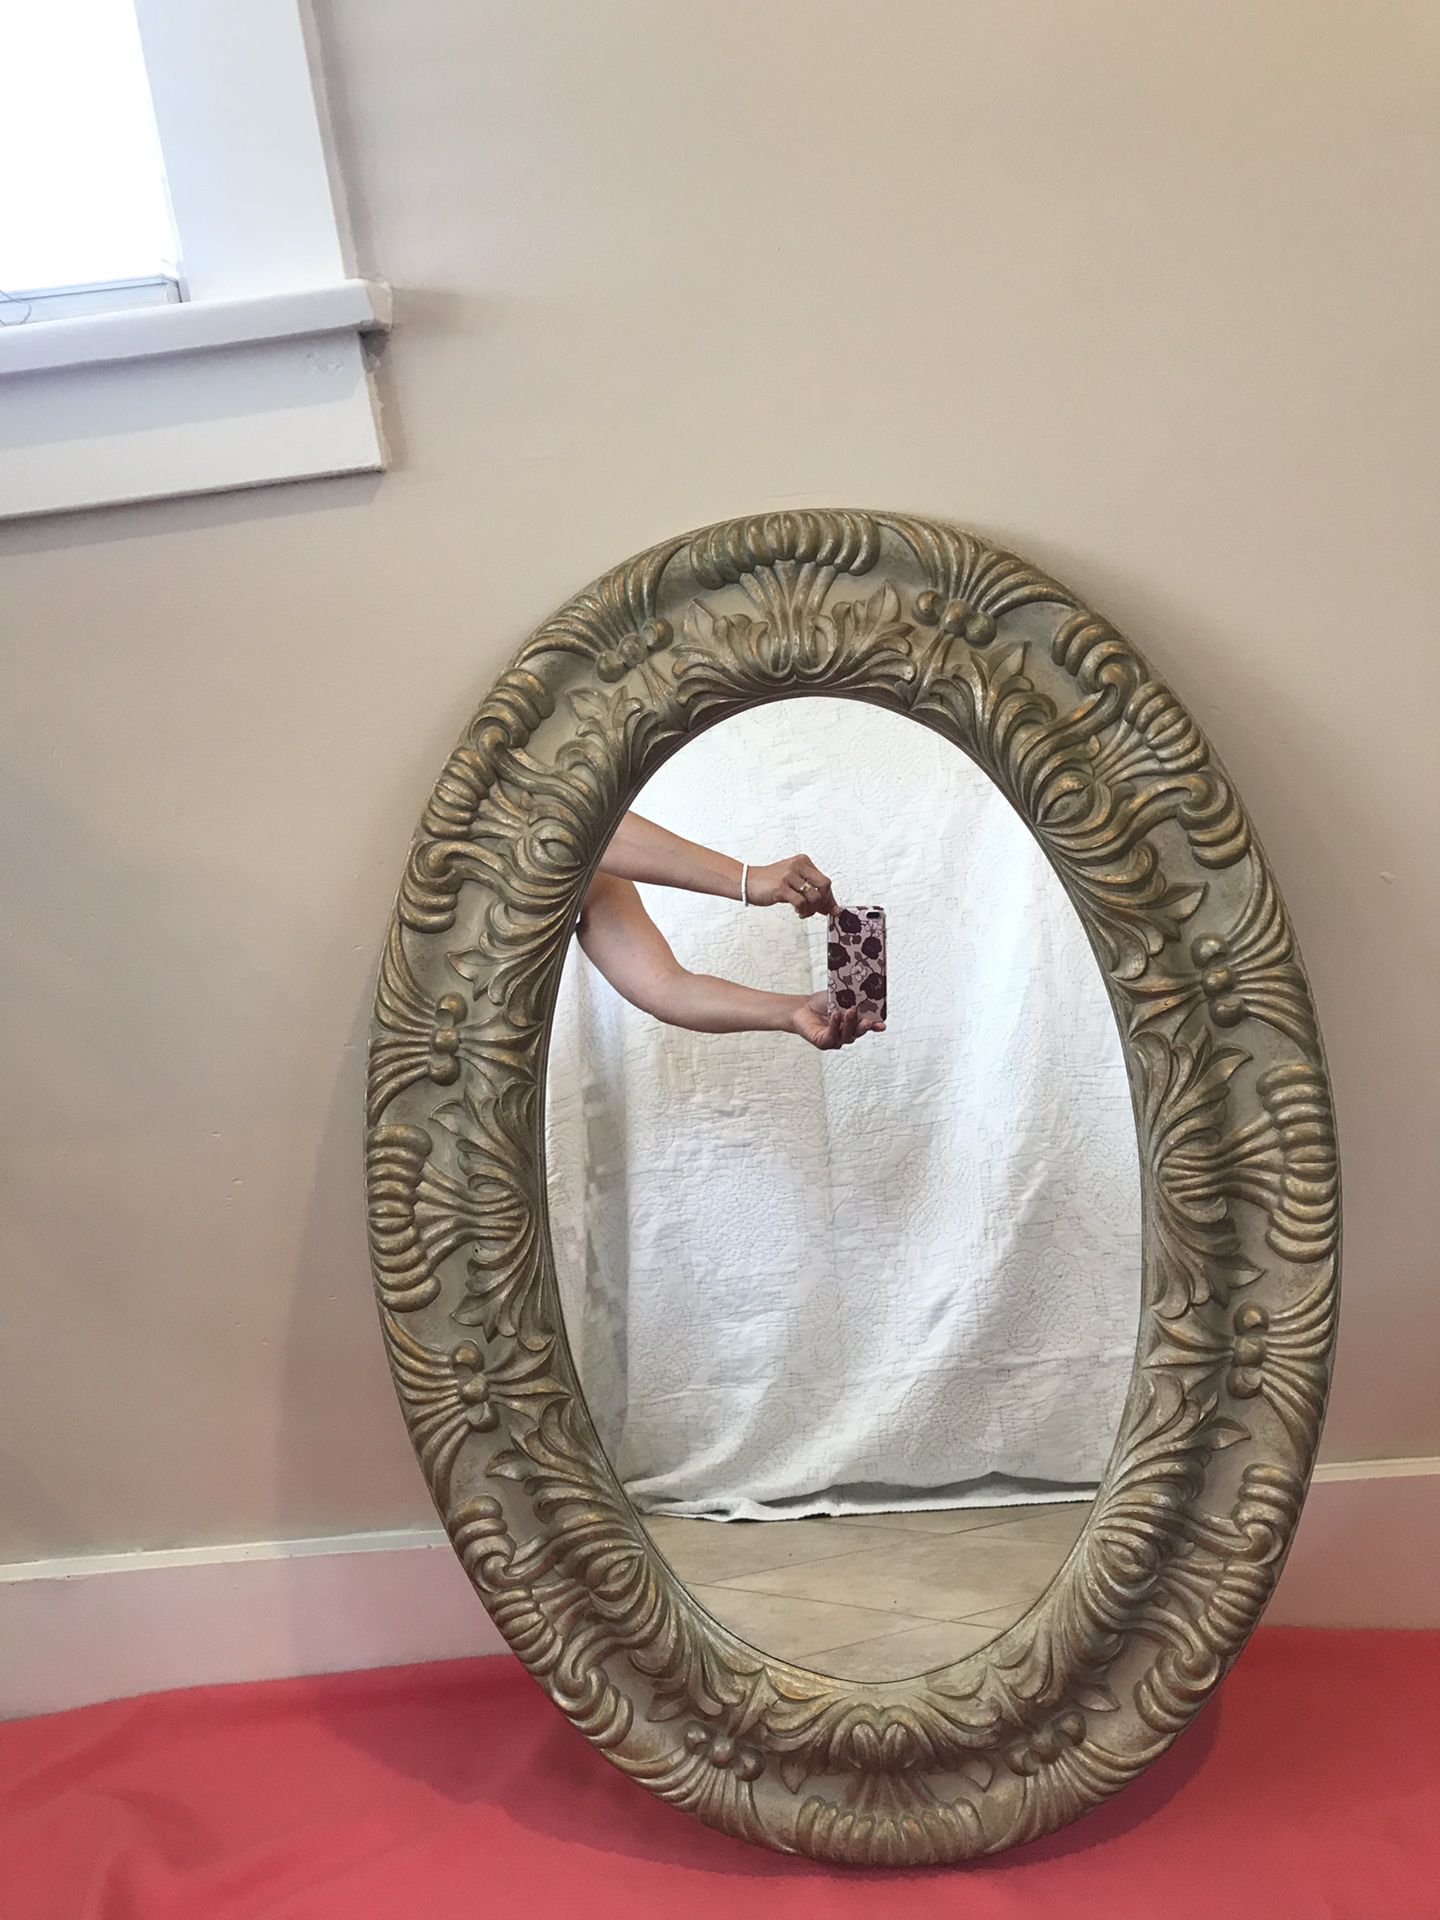 Oval mirror very good condition $45